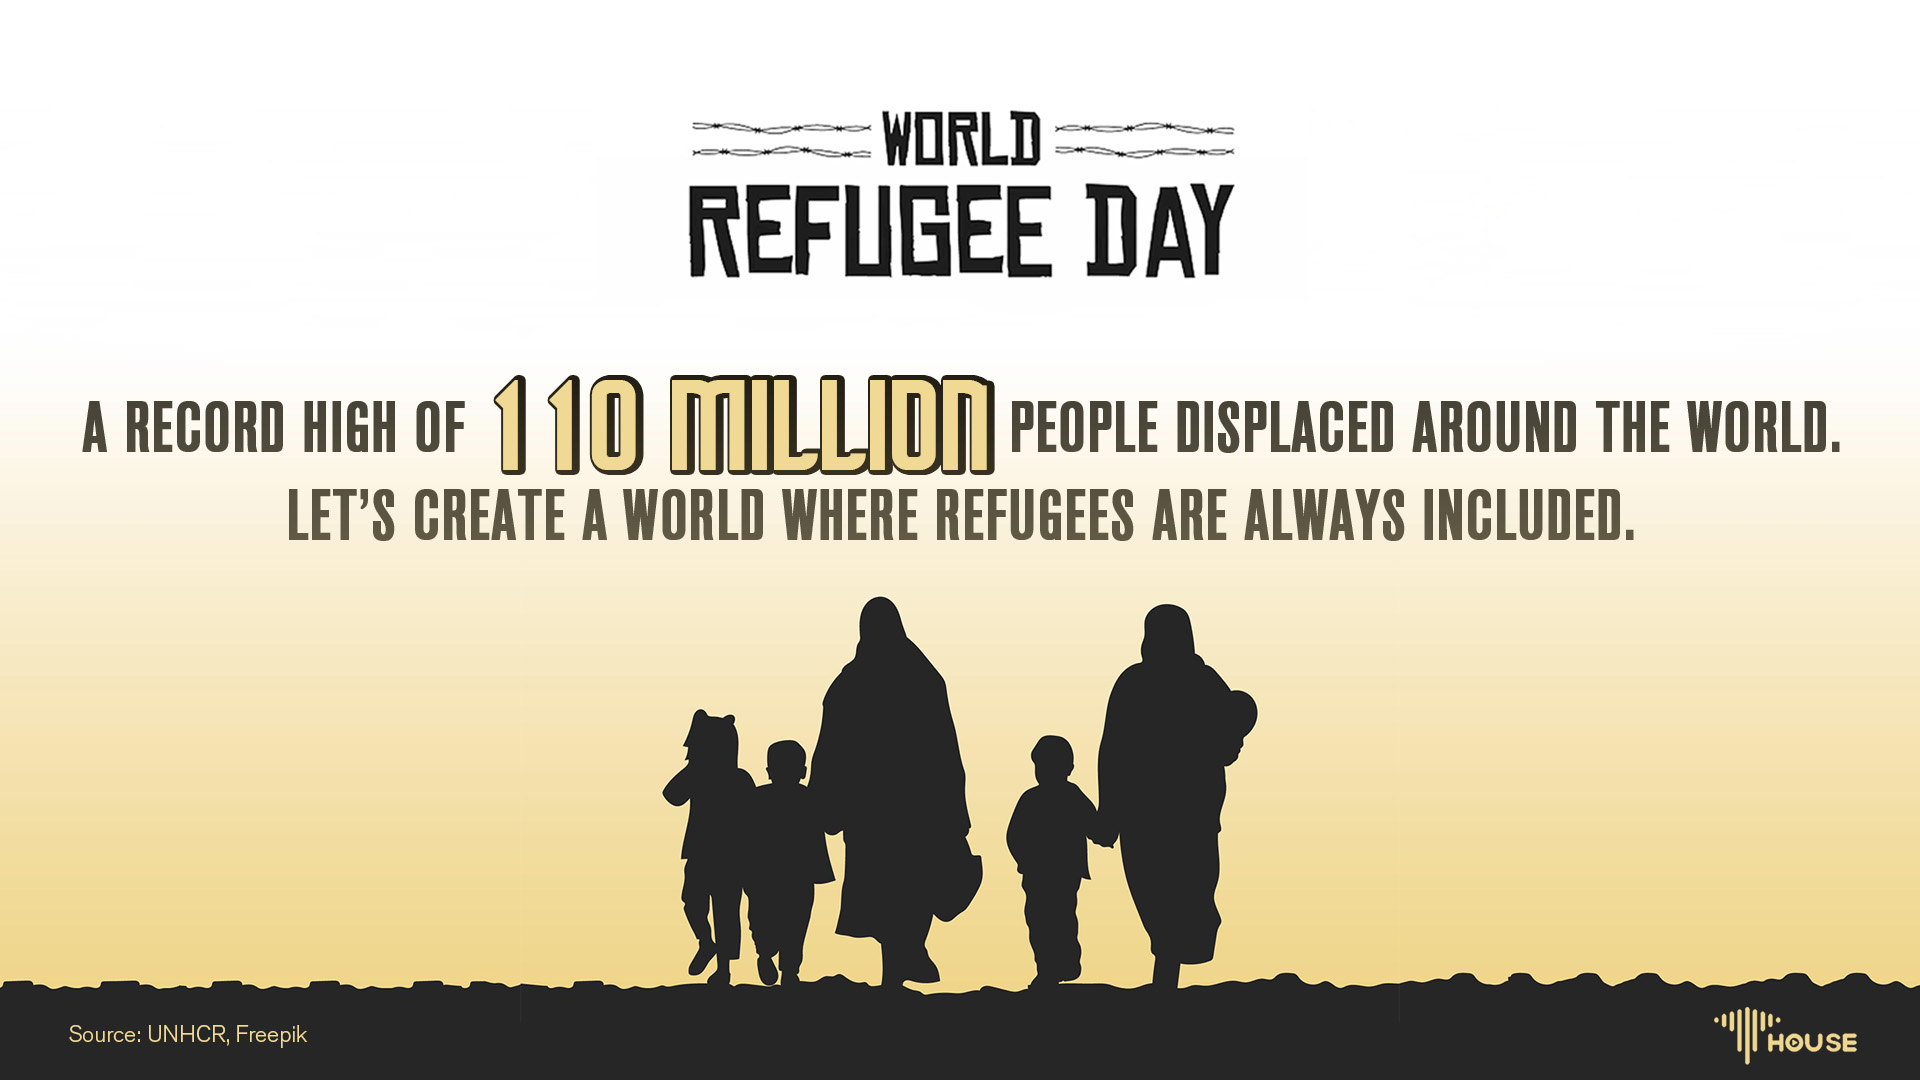 World Refugee Day: Let's create a world where refugees are always included